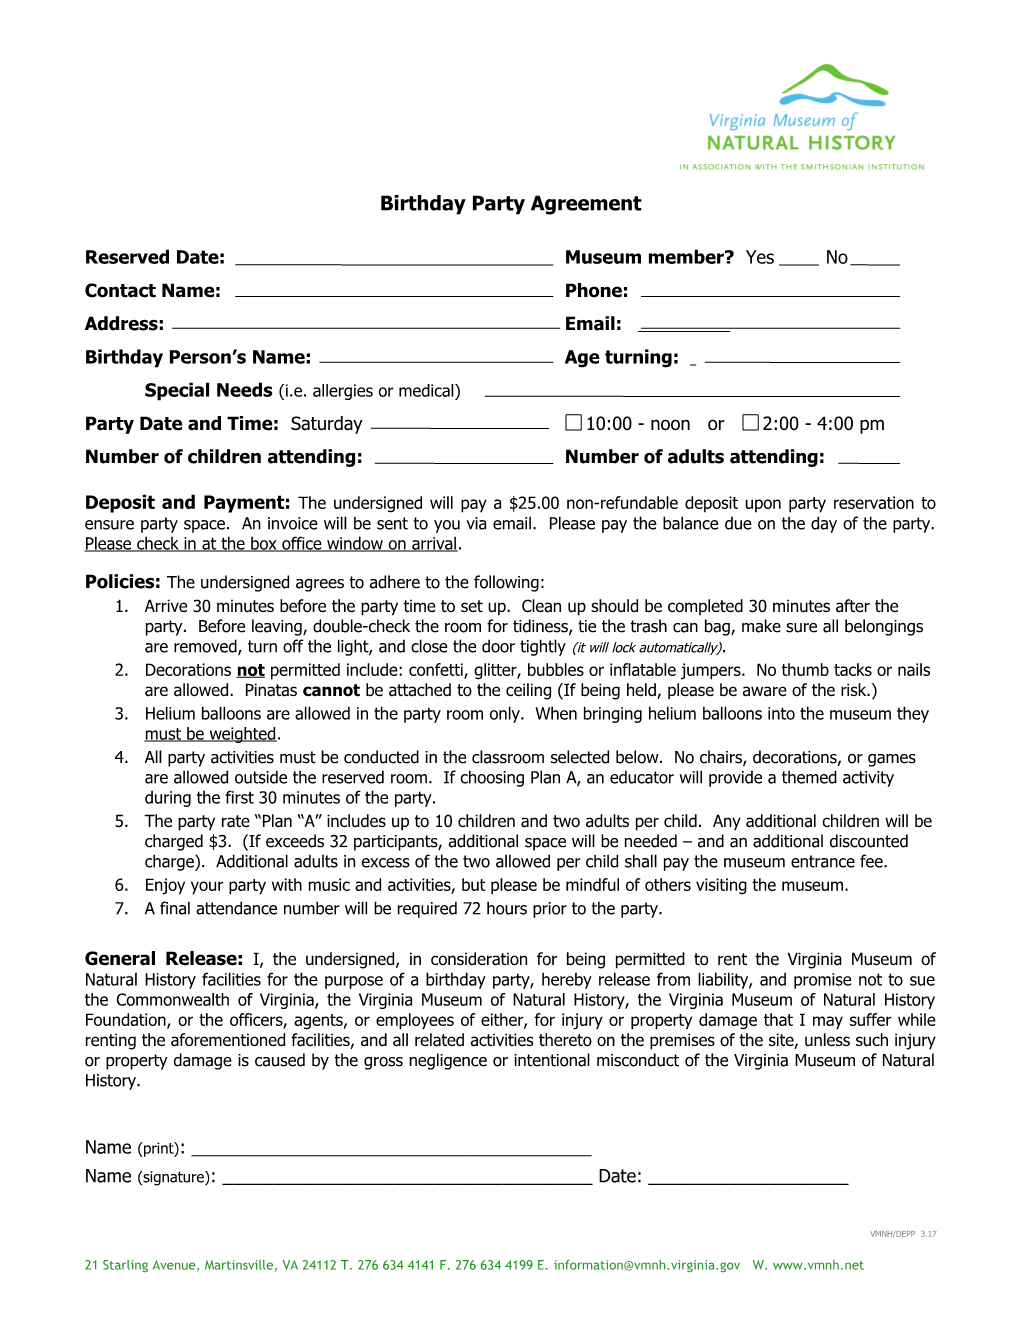 Birthday Party Agreement